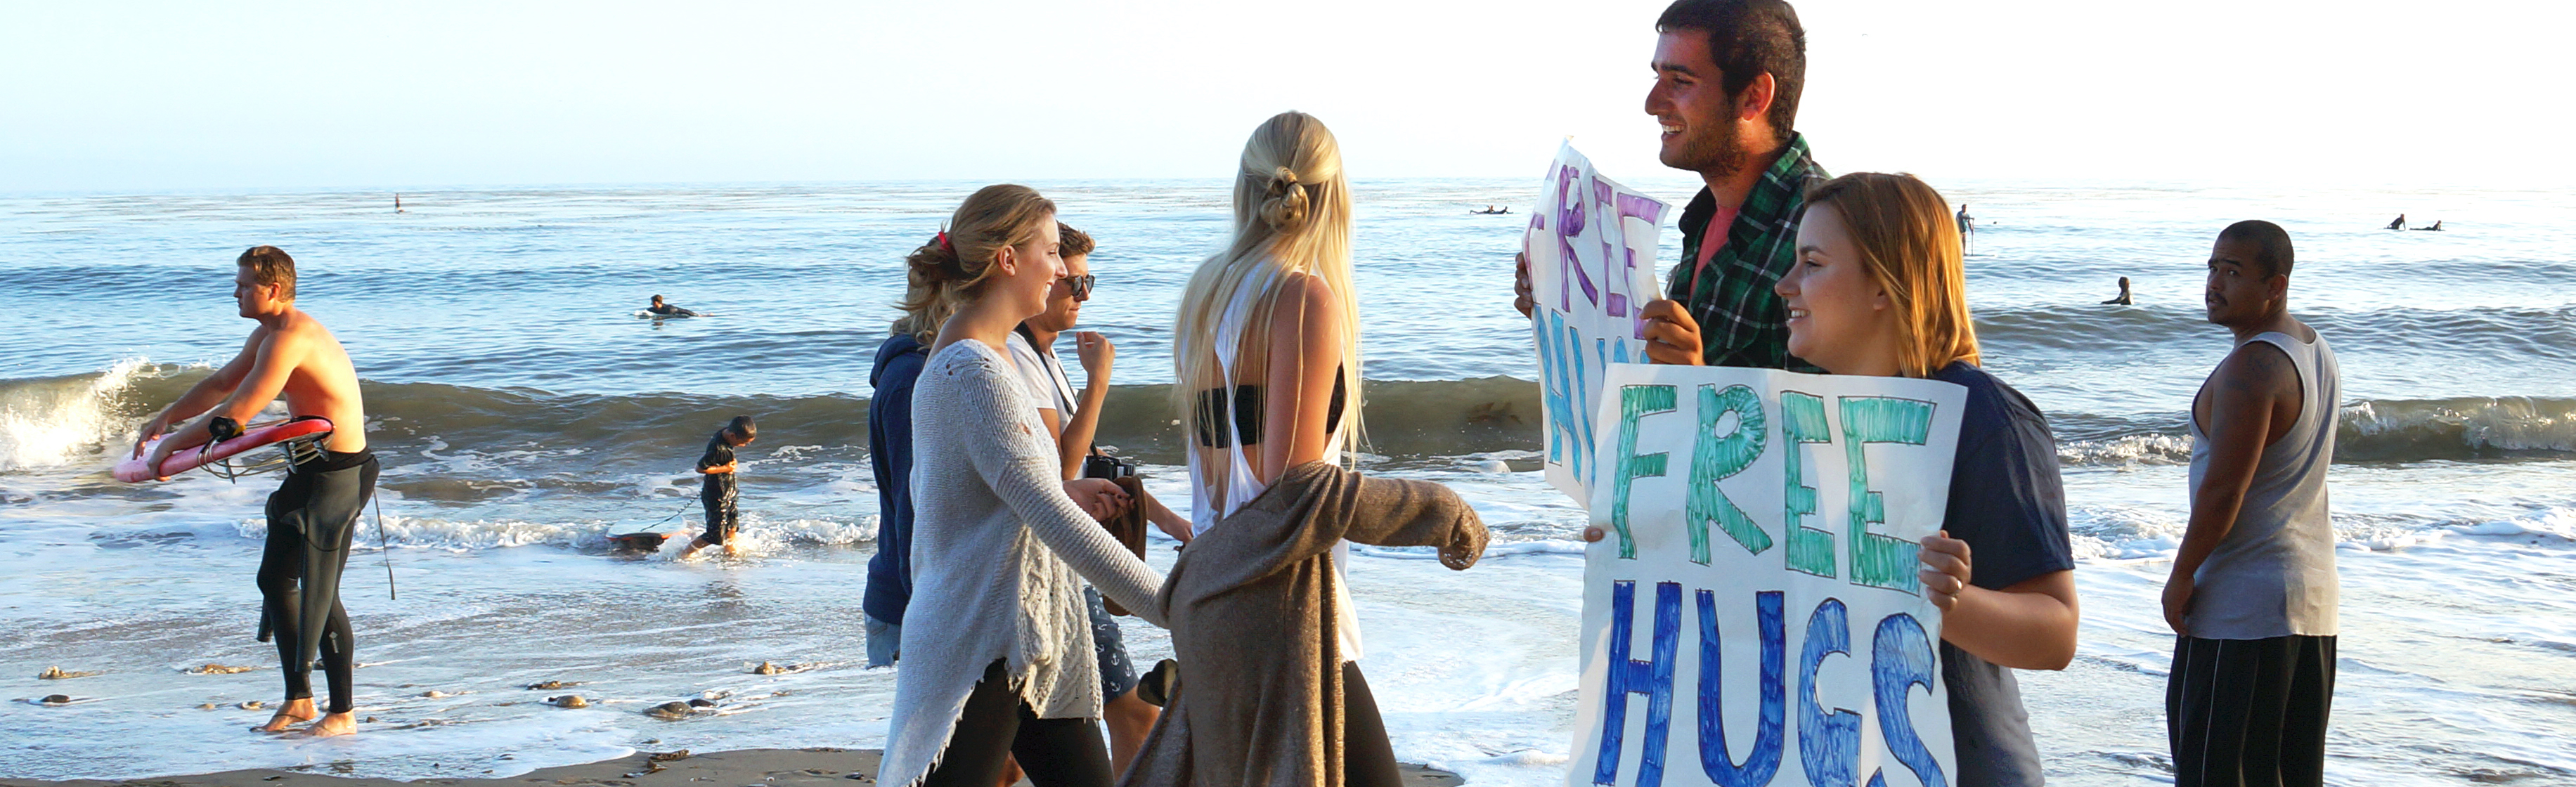 Image of people holding free hugs sign